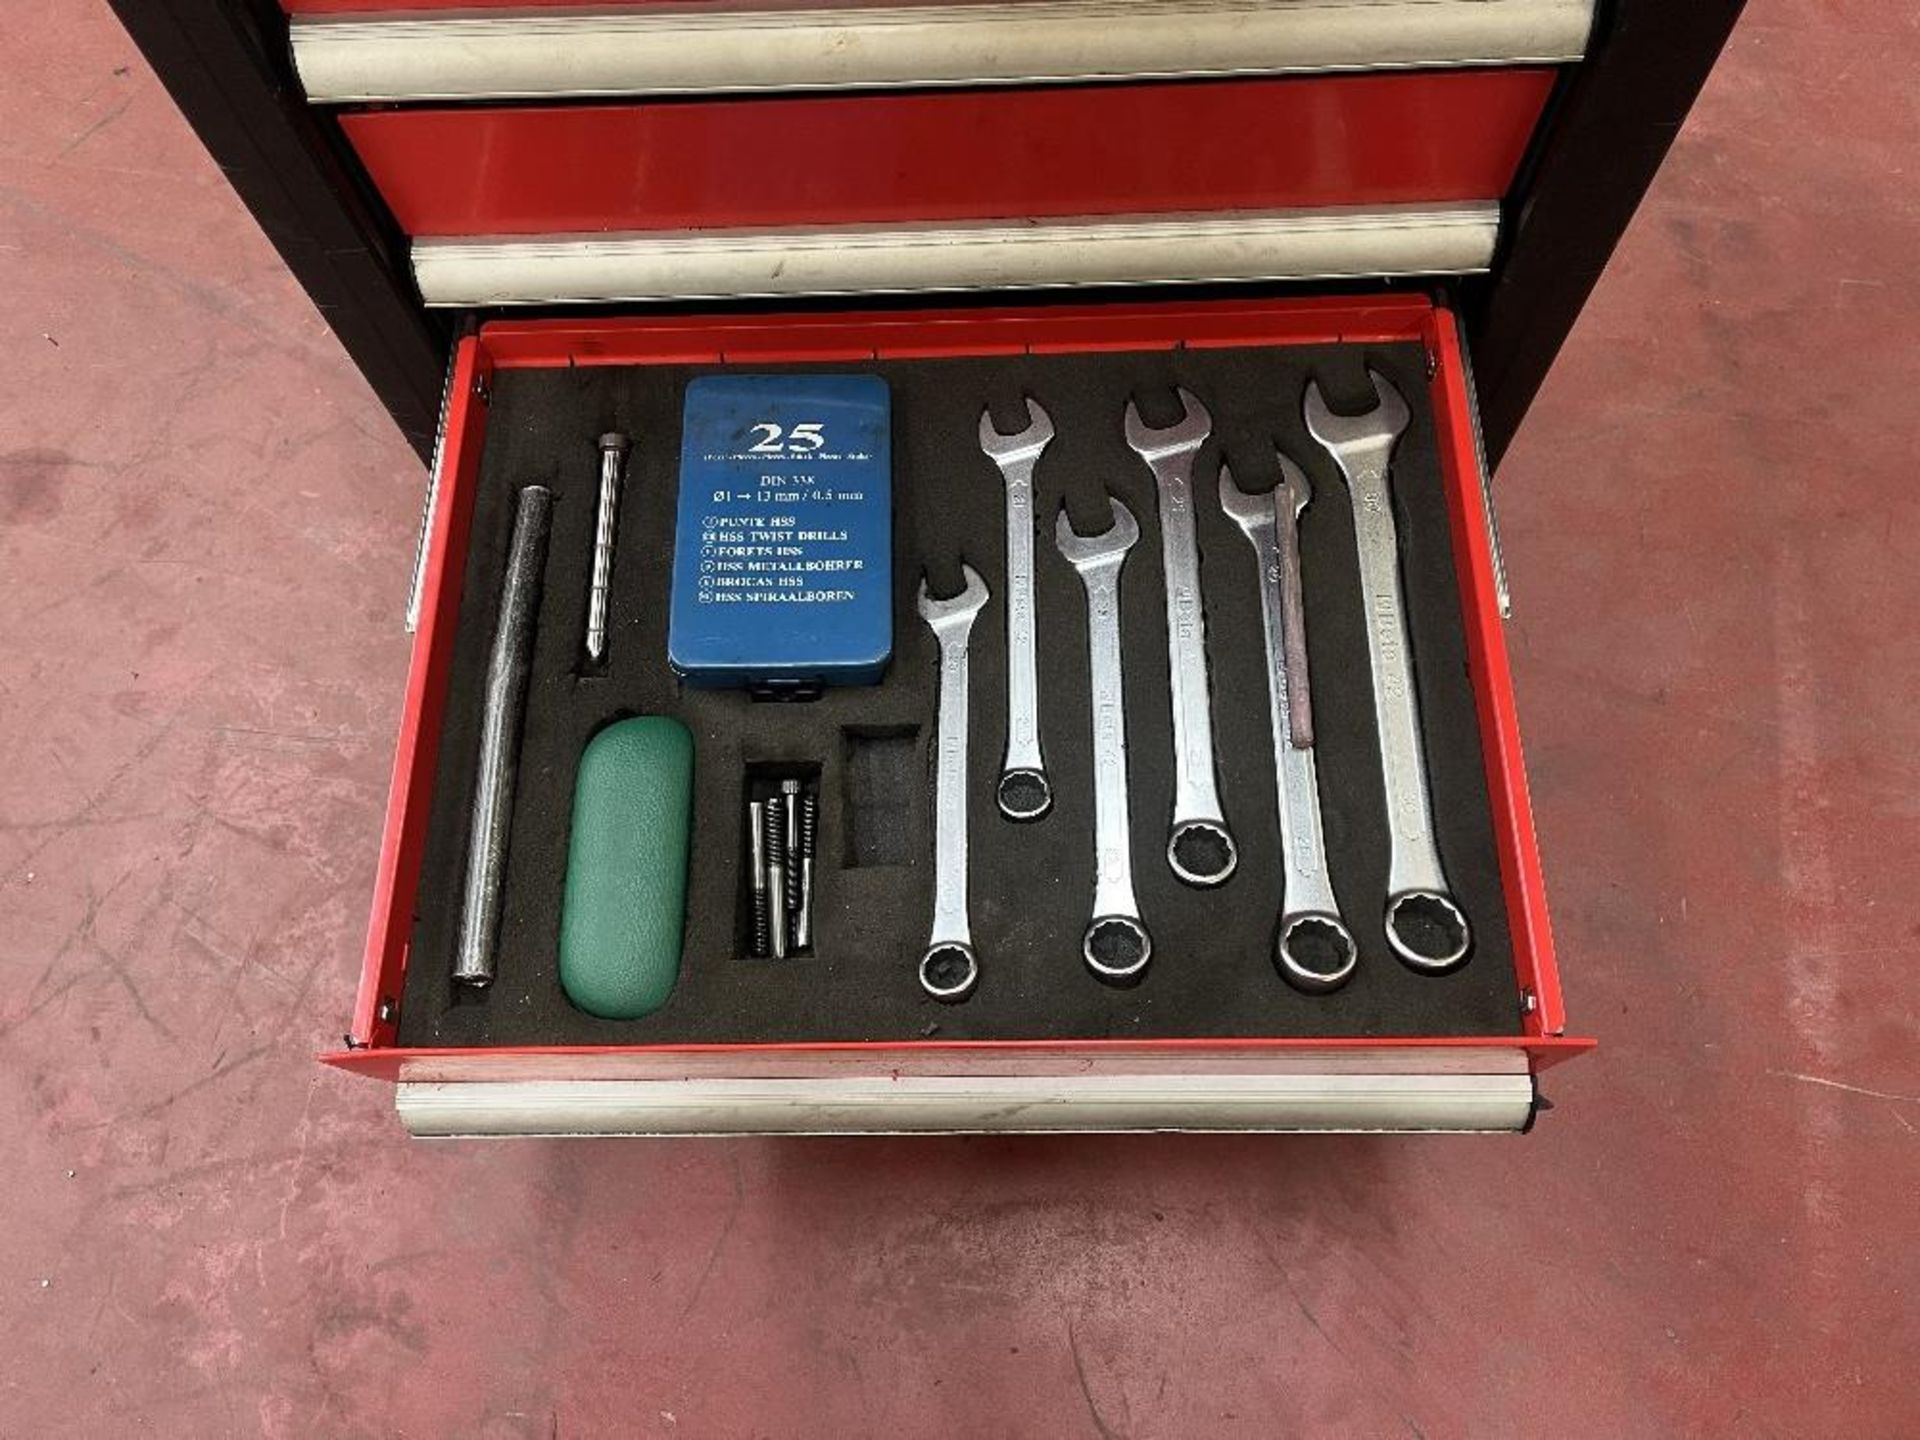 Mobile 8 drawer tool cabinets with contents - Image 11 of 11